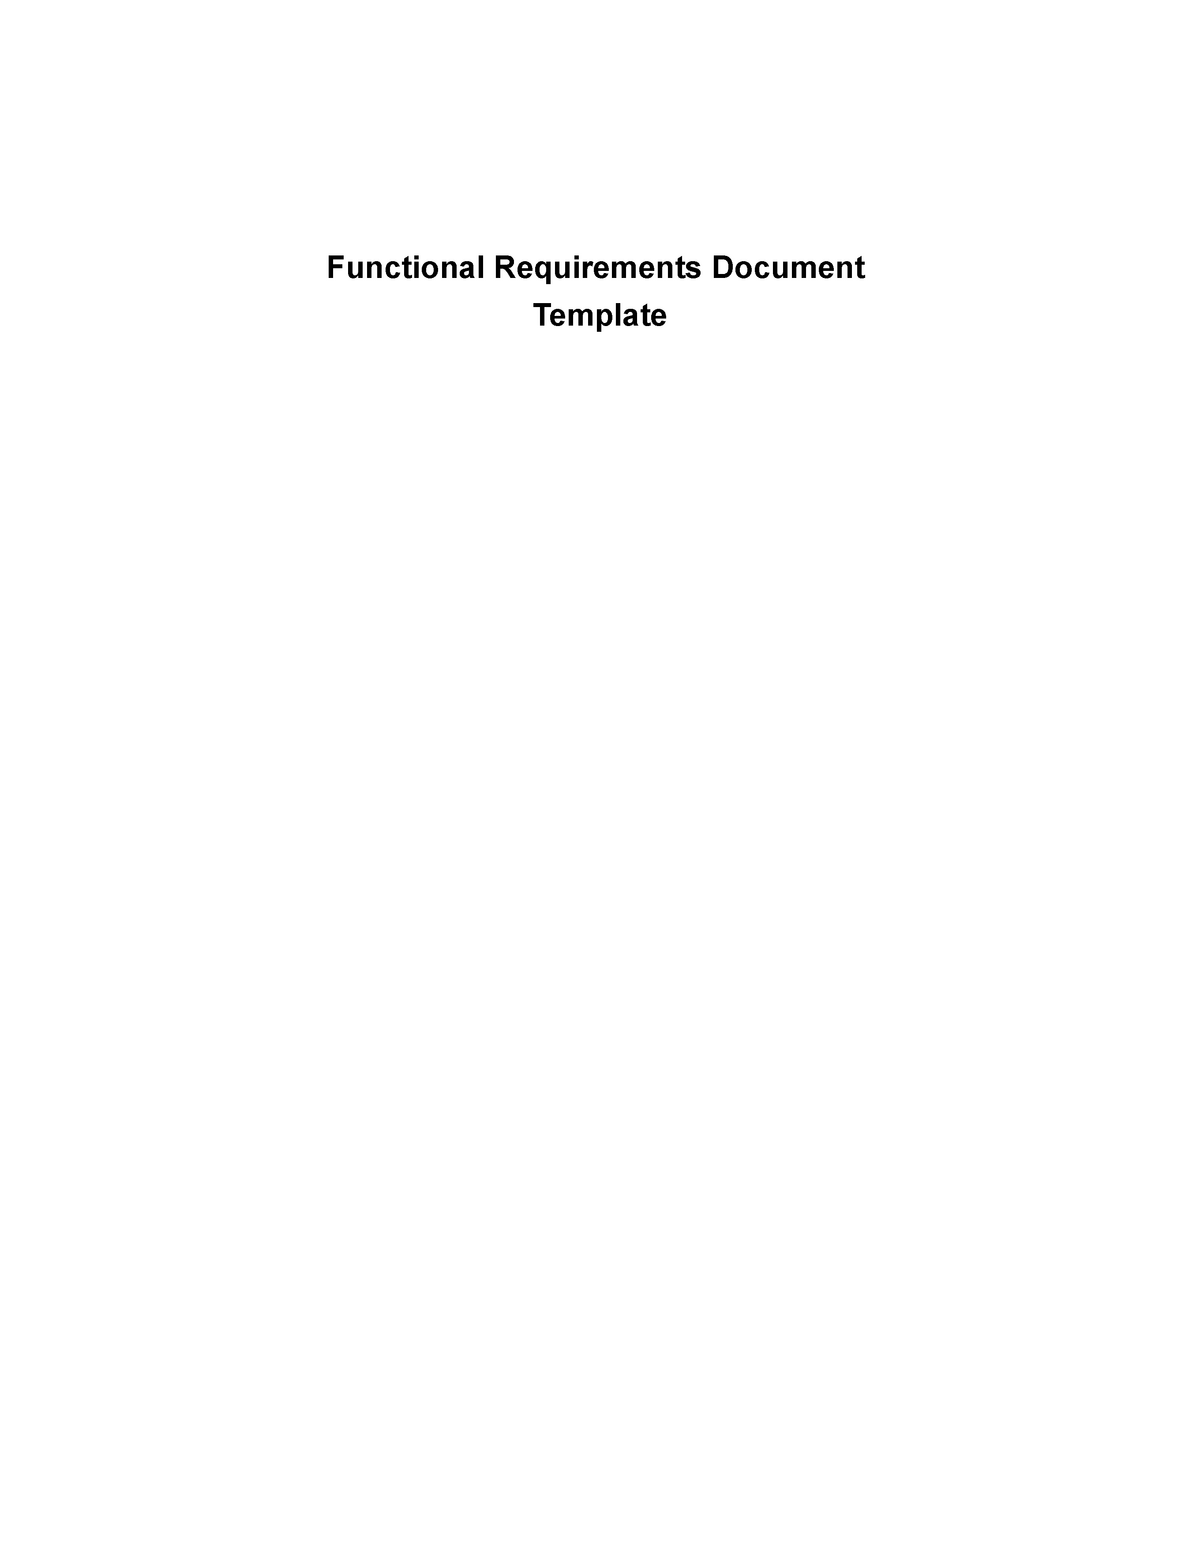 Frdtemplate Sample Frd Functional Requirements Document Template